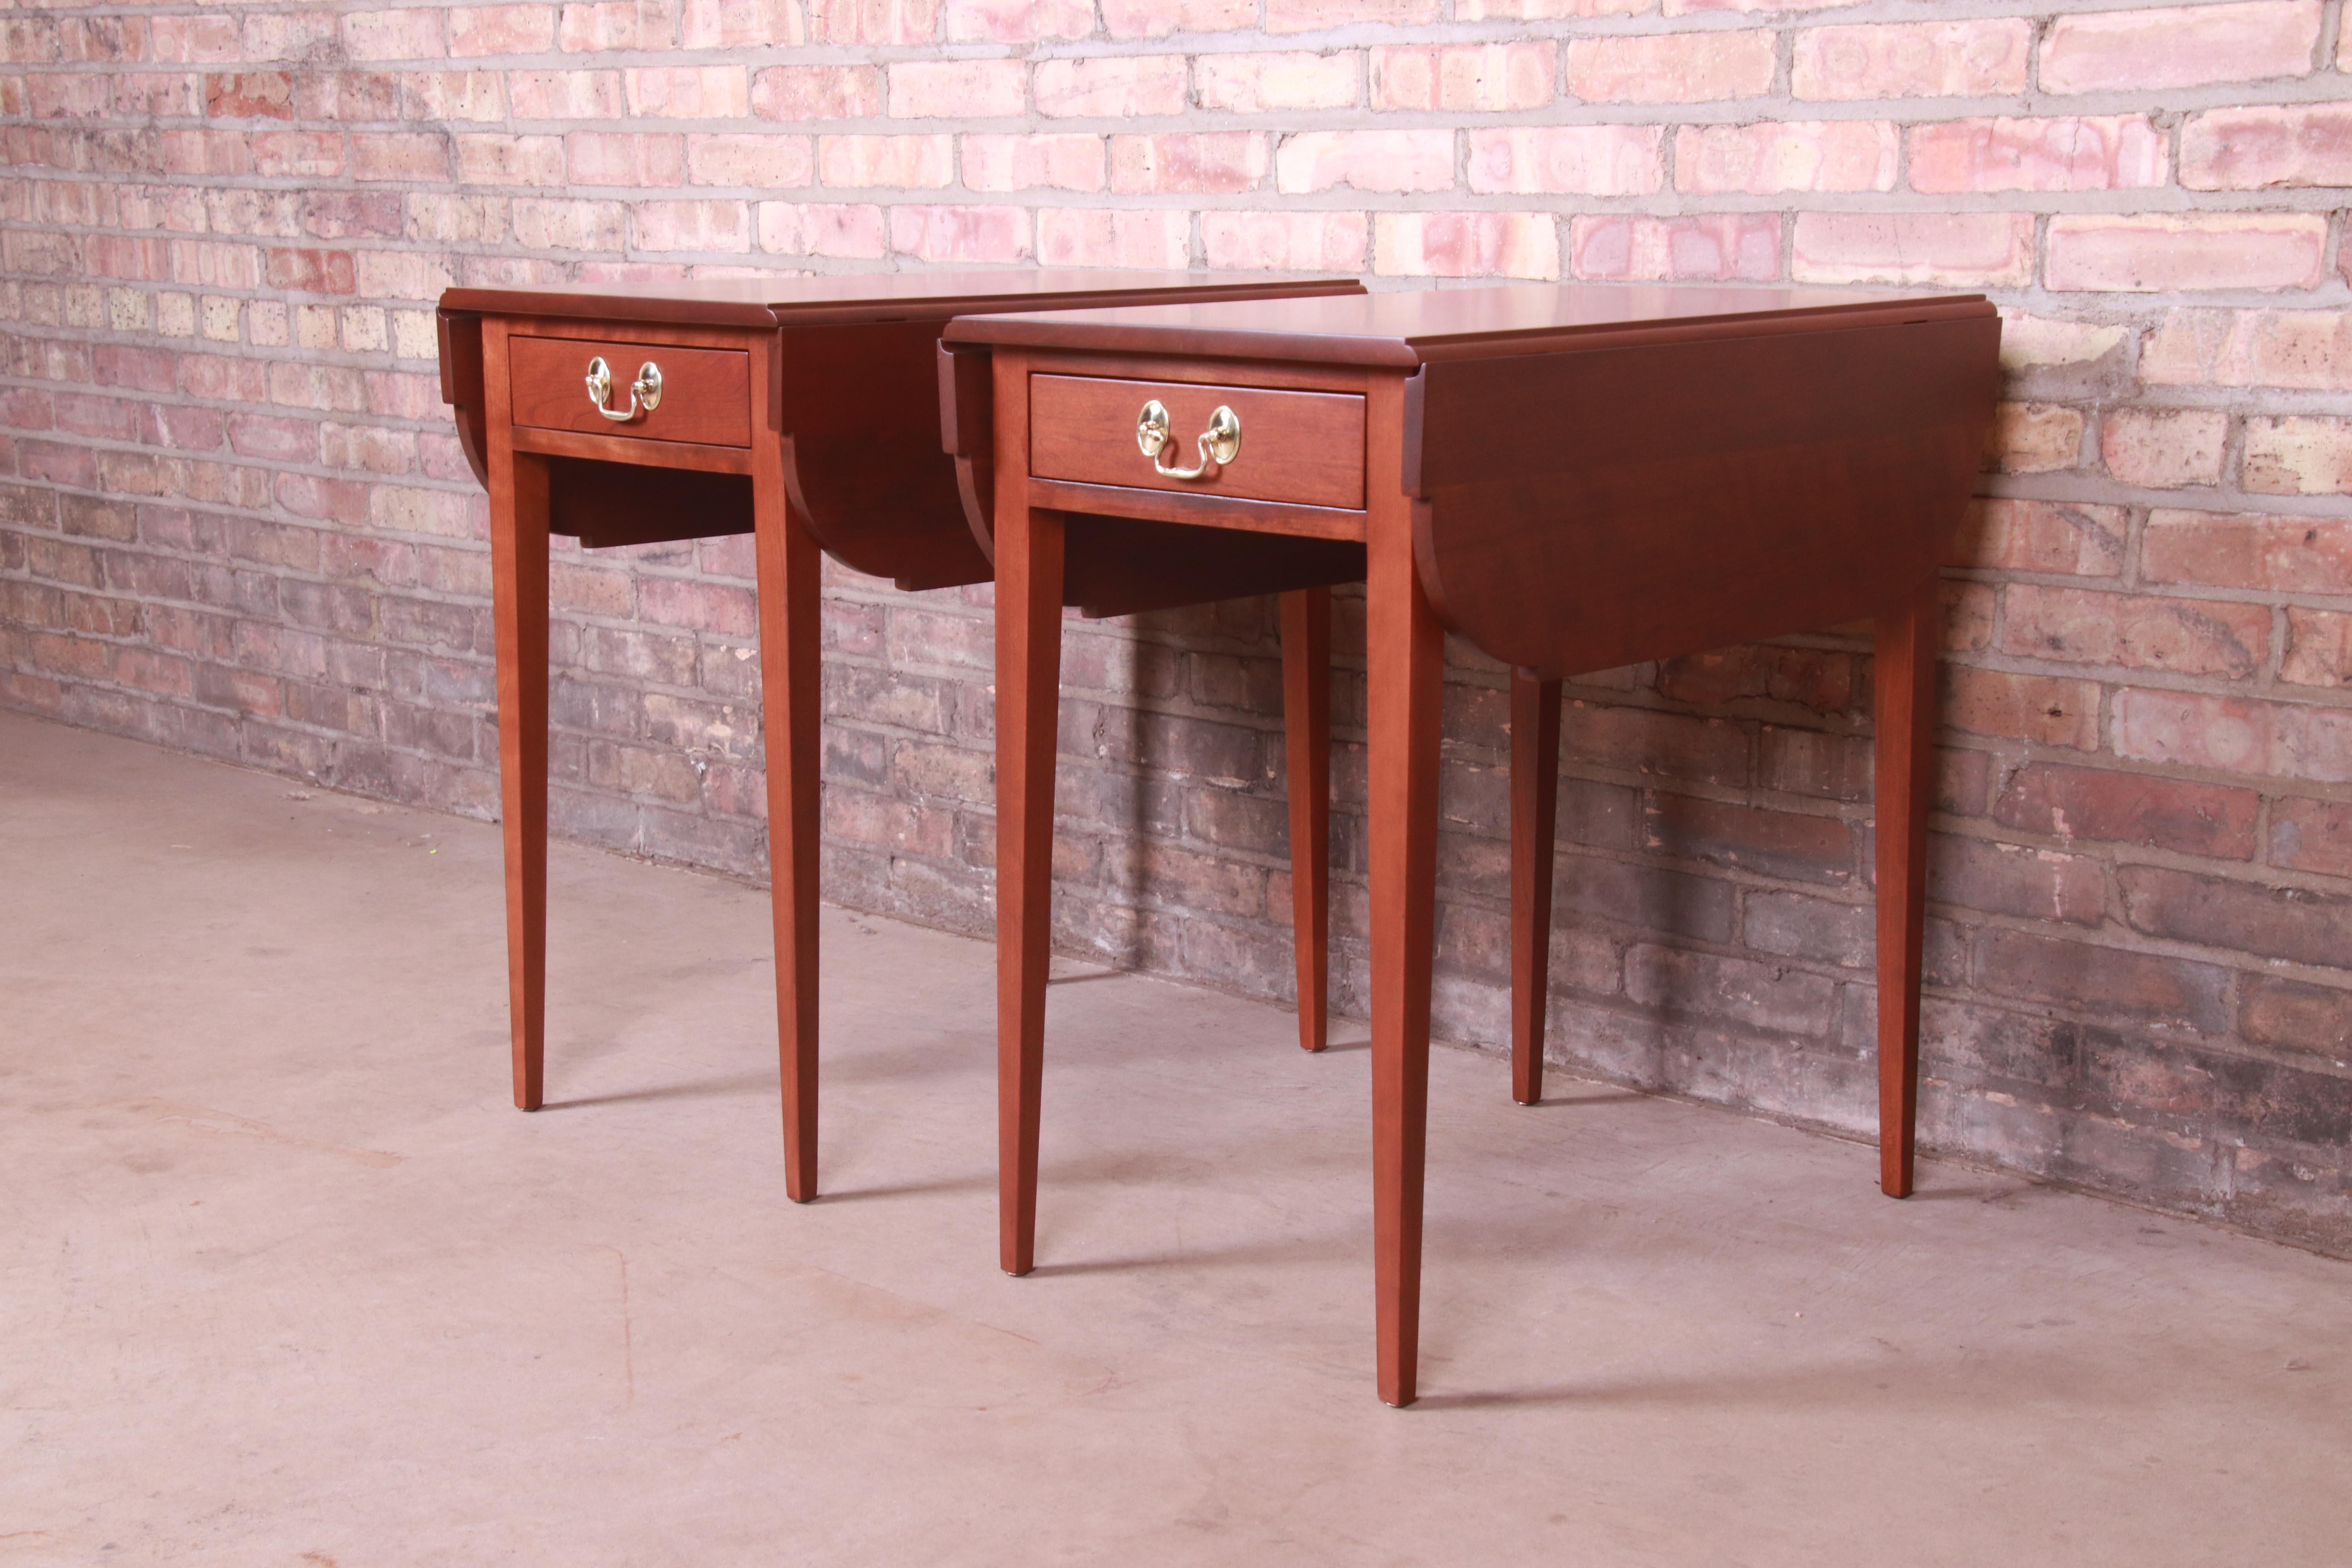 20th Century Stickley Federal Solid Cherry Wood Pembroke Tea Tables, Newly Refinished For Sale